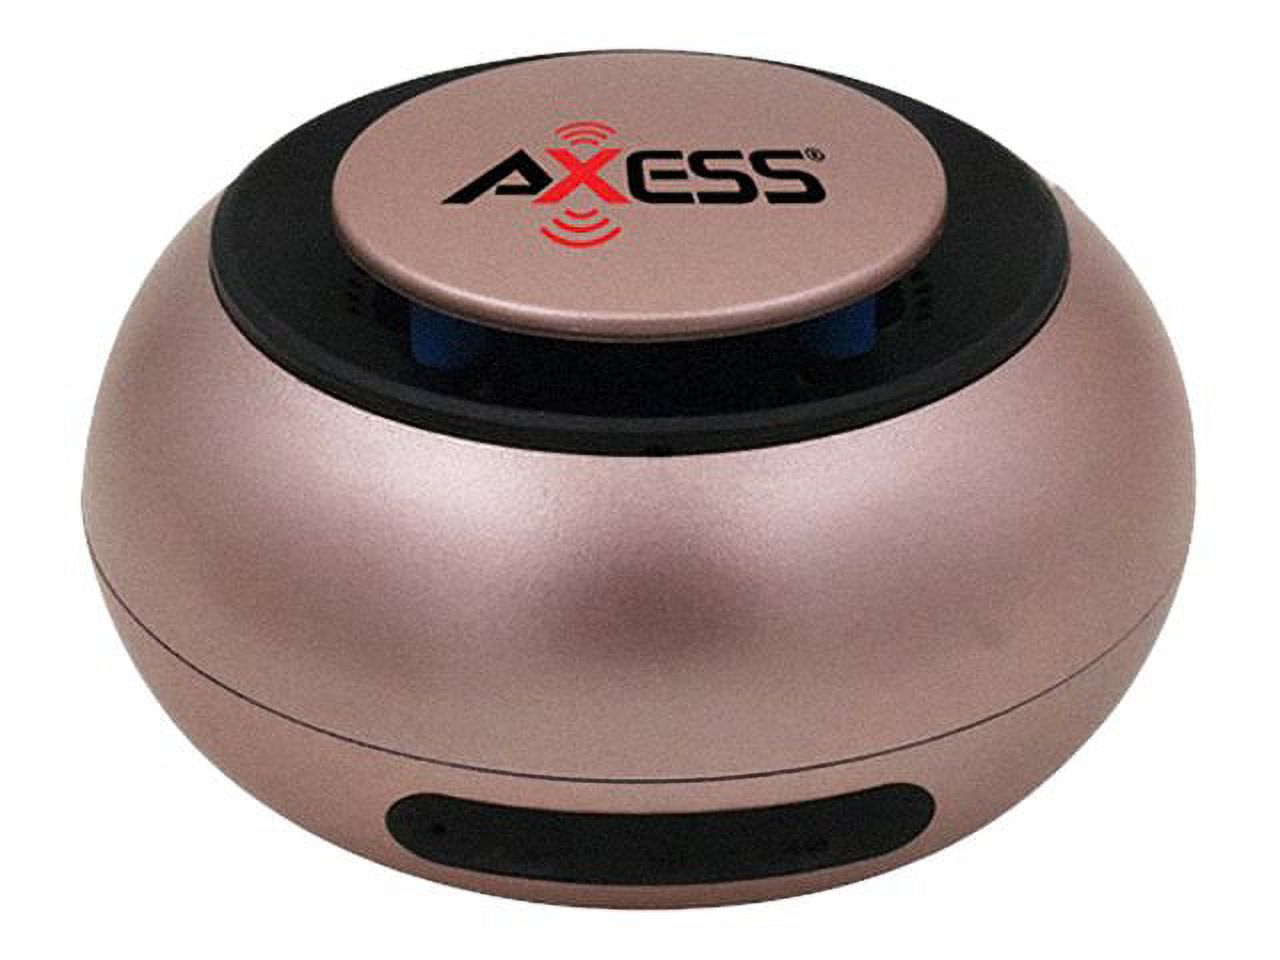 AXESS Bluetooth Speaker Built-In Rechargeable Battery Rose Gold SPBW1048RG - image 4 of 5